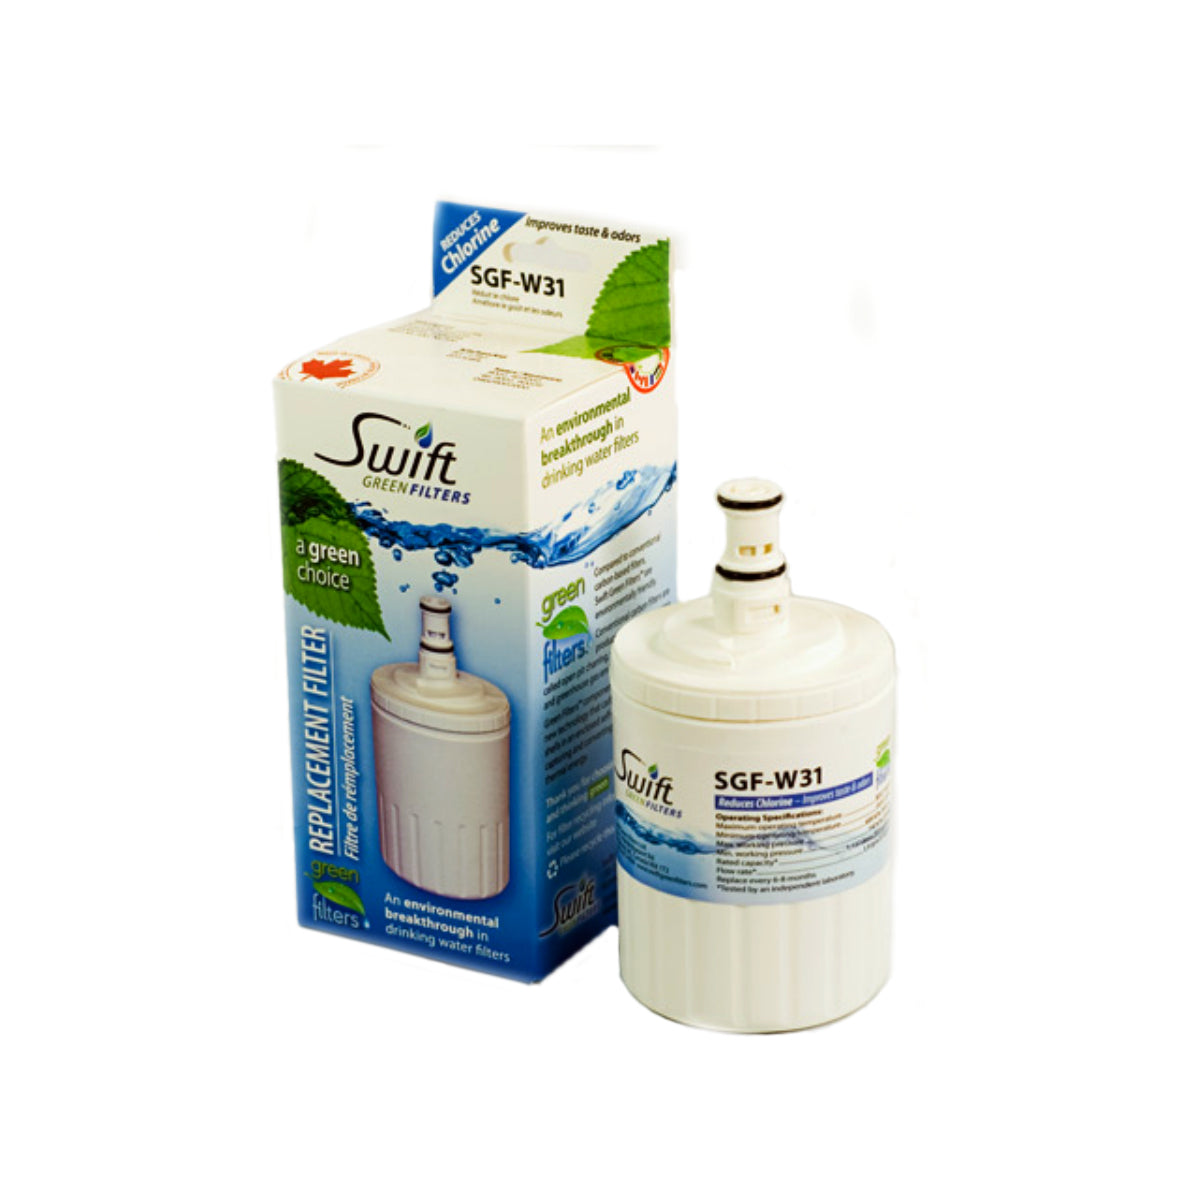 buy water filters at cheap rate in bulk. wholesale & retail plumbing goods & supplies store. home décor ideas, maintenance, repair replacement parts